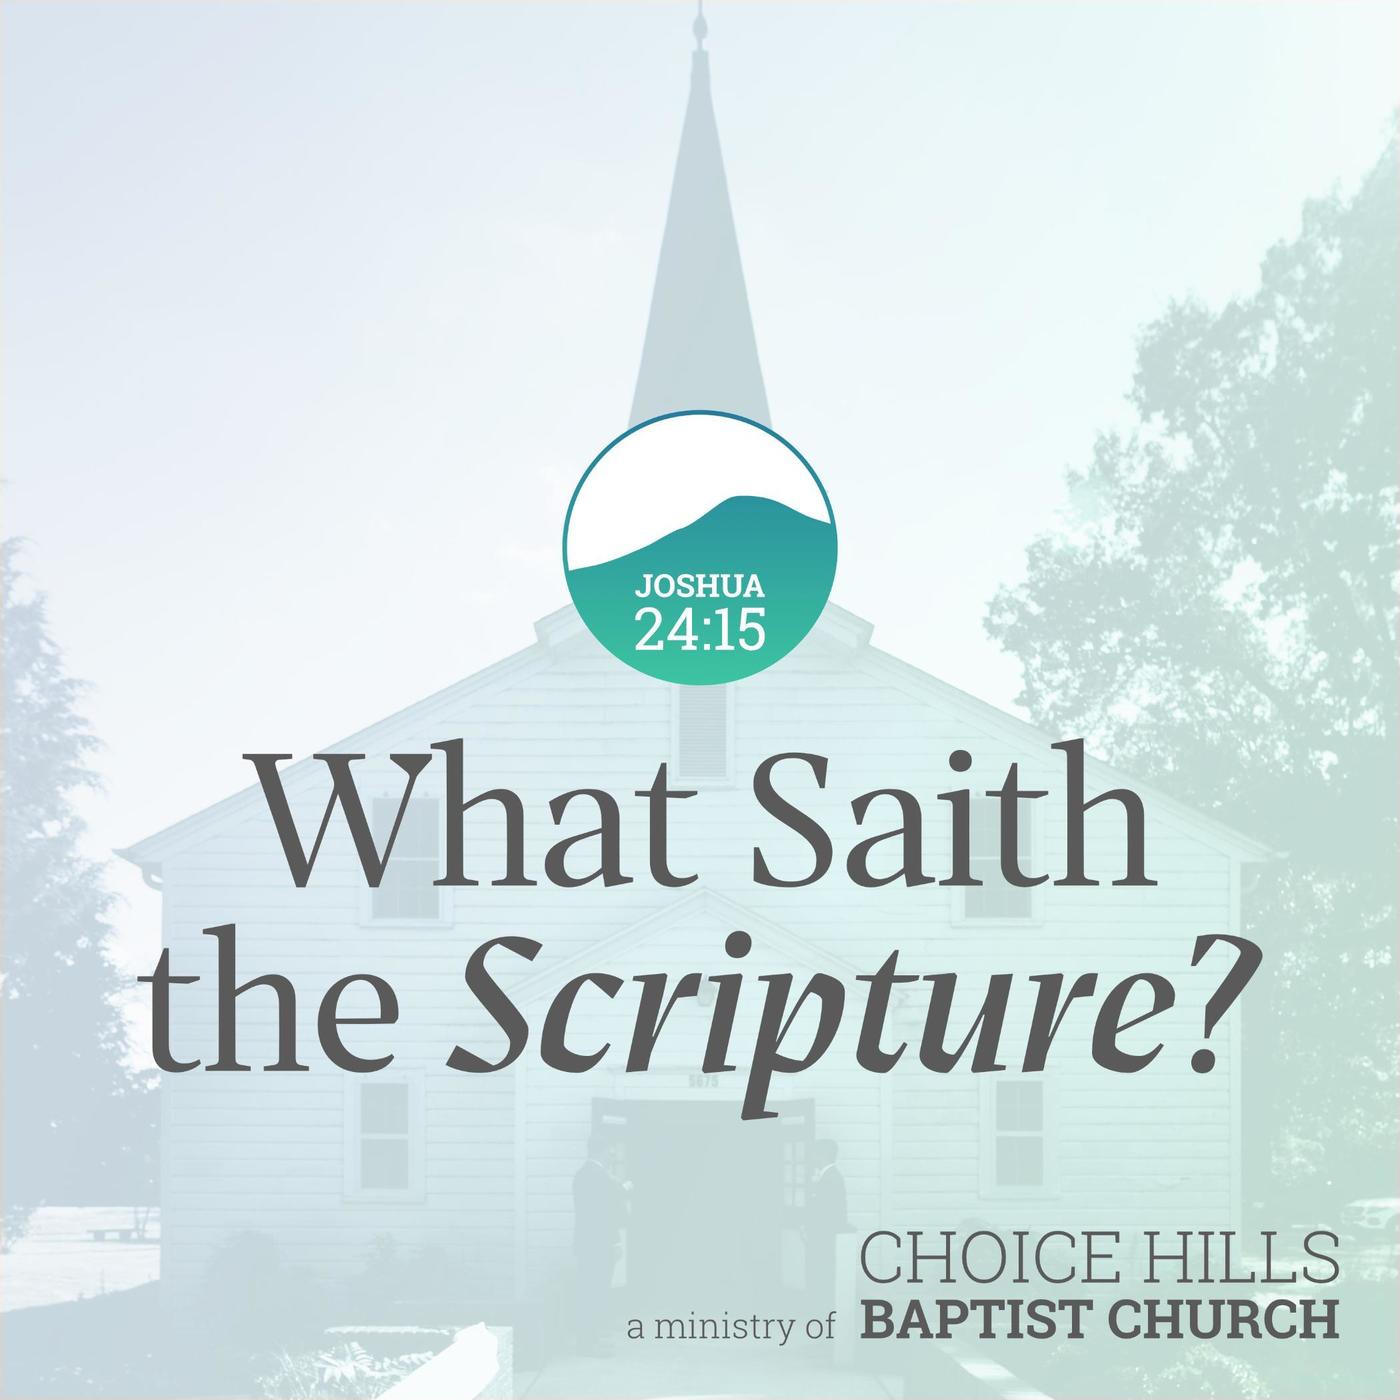 Adult Sunday School: Study of the 119th Psalm (Part 5)